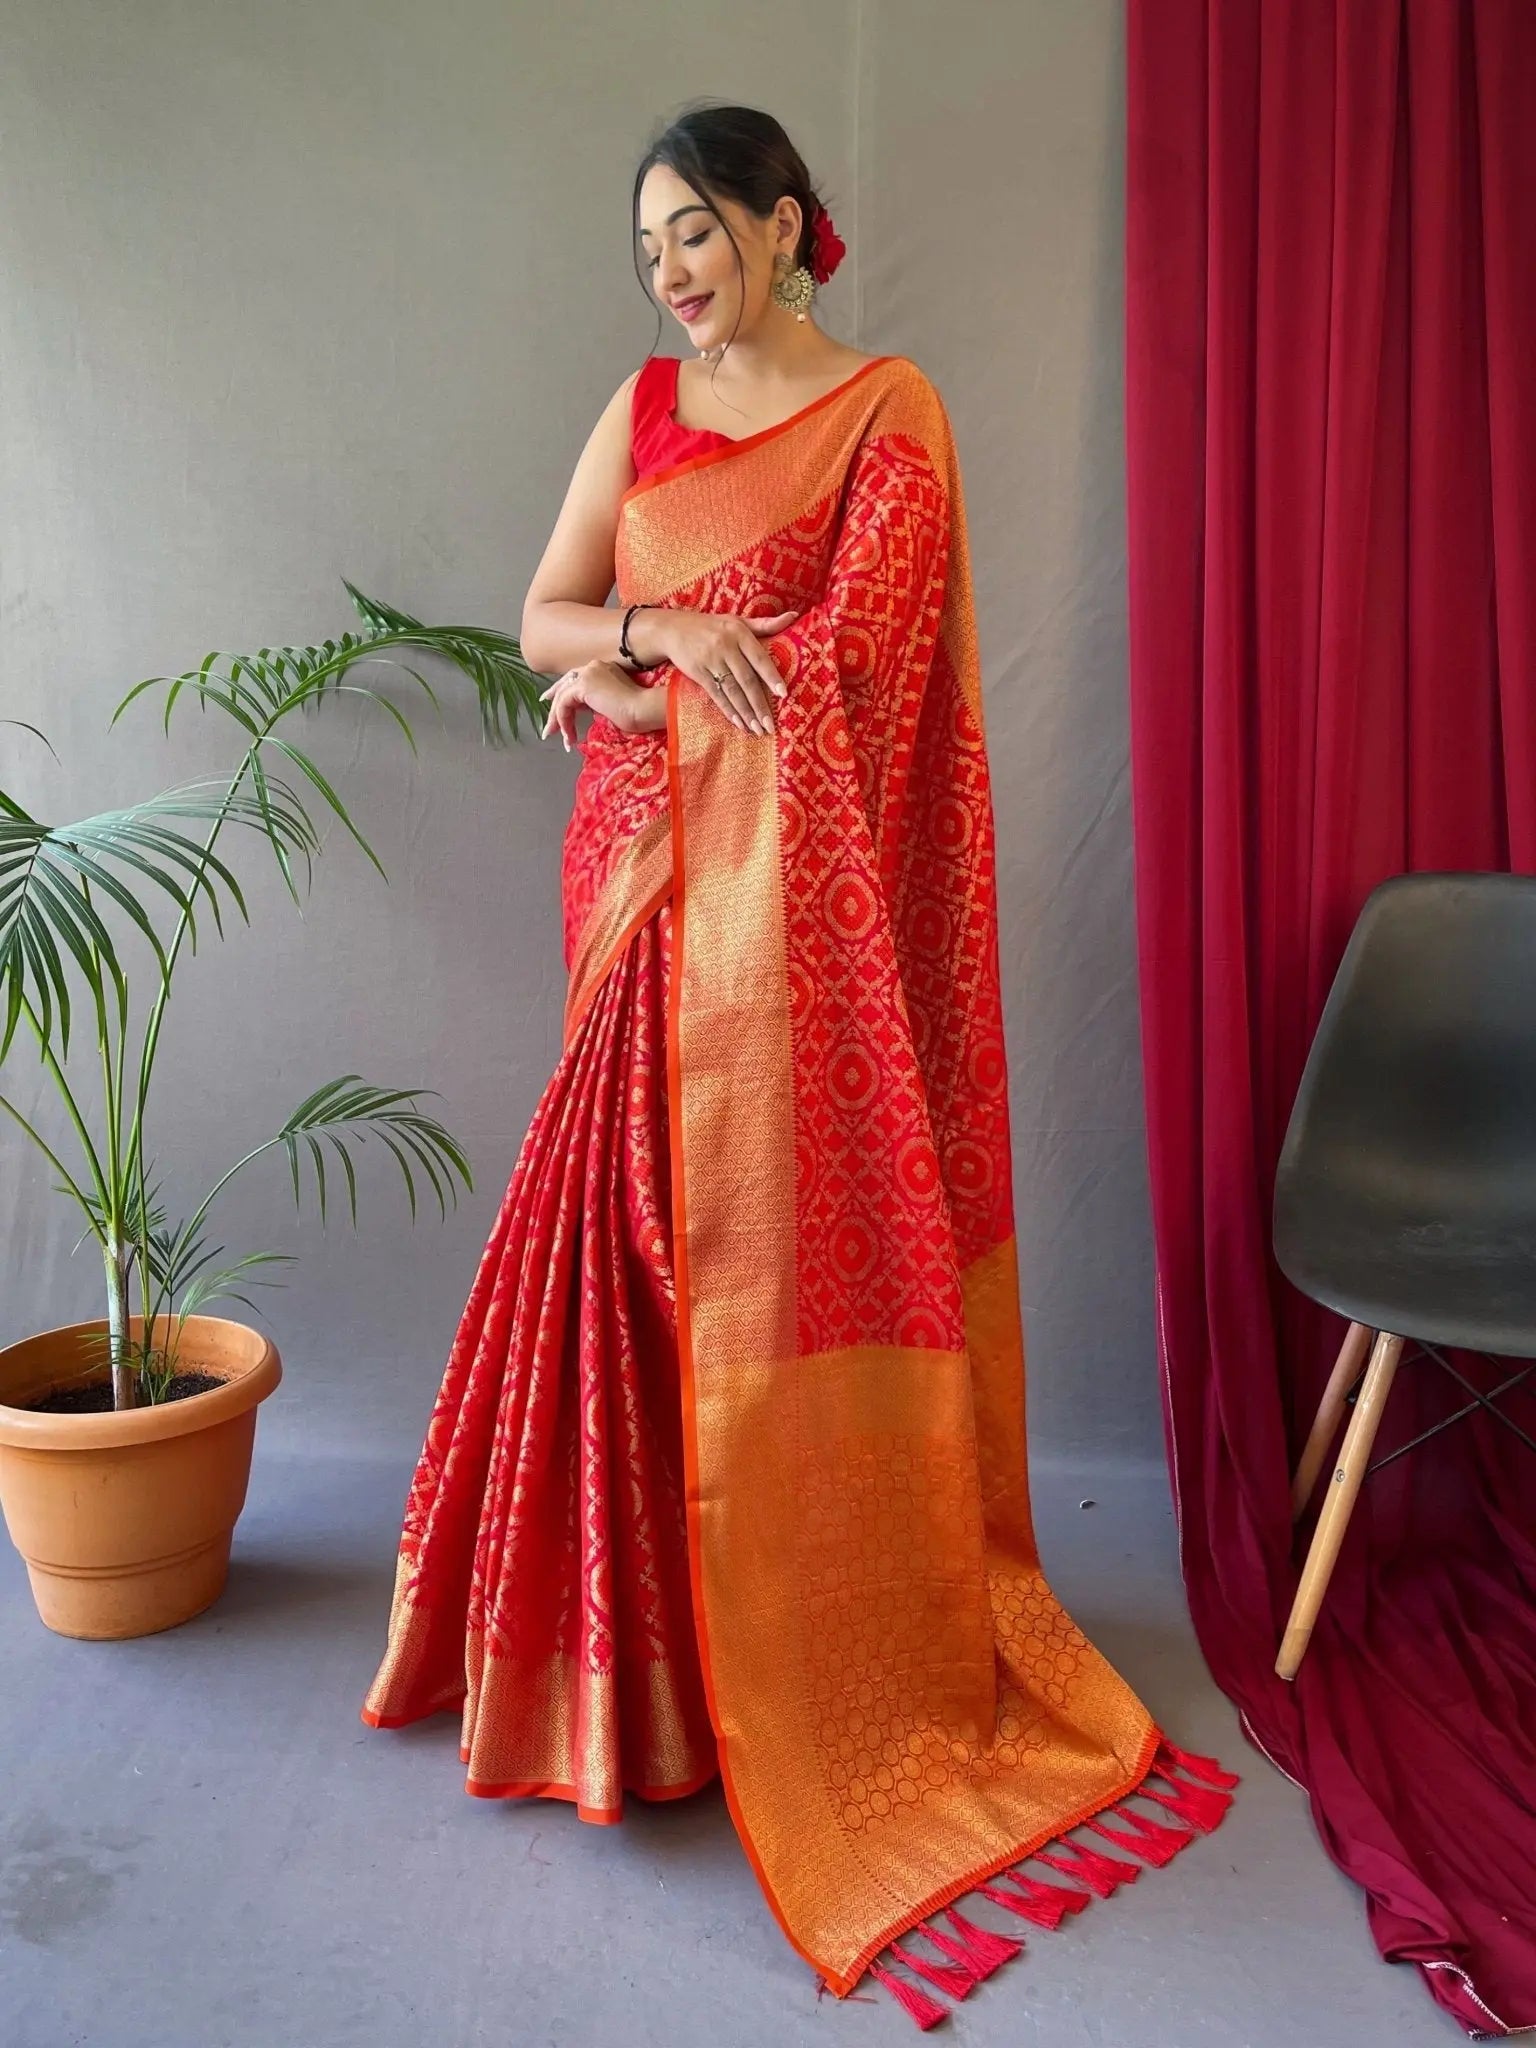 Patola Silk Woven Vol. 5 Contrast Red with Orange - Colorful Saree